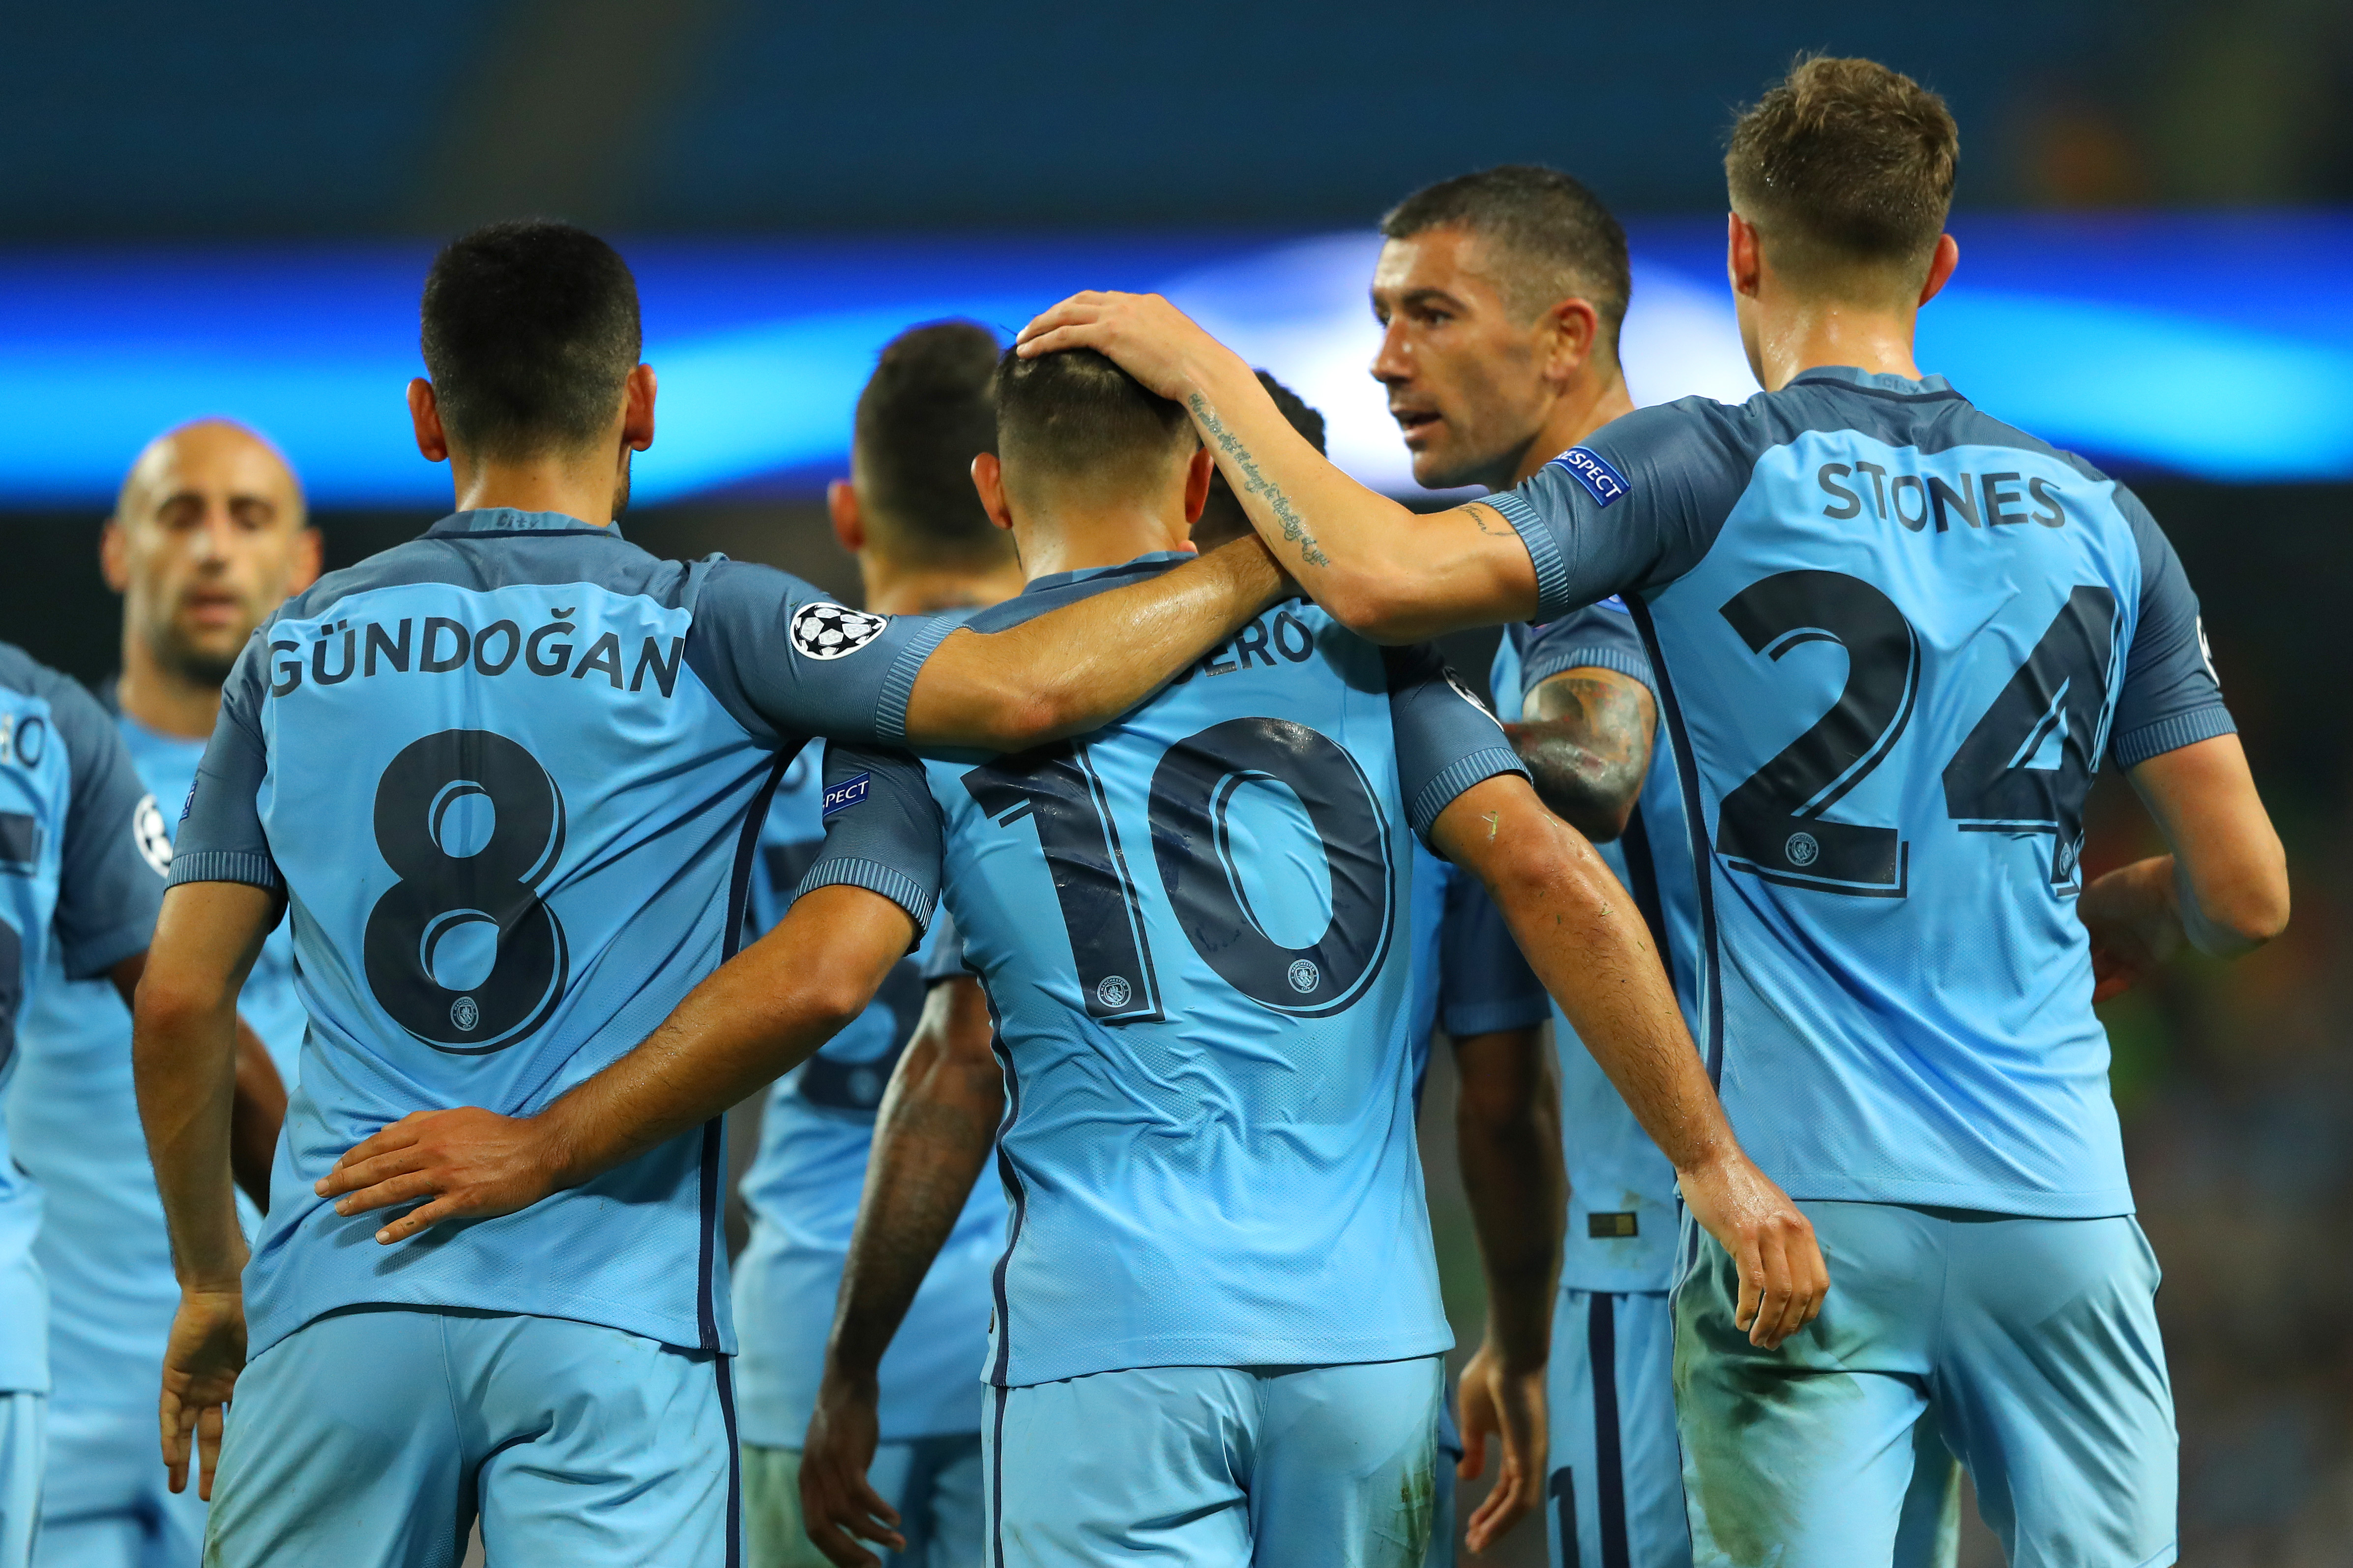 MANCHESTER, ENGLAND - SEPTEMBER 14: Manchester City players celebrate with goalscorer Sergio Aguero during the UEFA Champions League match between Manchester City FC and VfL Borussia Moenchengladbach at Etihad Stadium on September 14, 2016 in Manchester, England.  (Photo by Richard Heathcote/Getty Images)